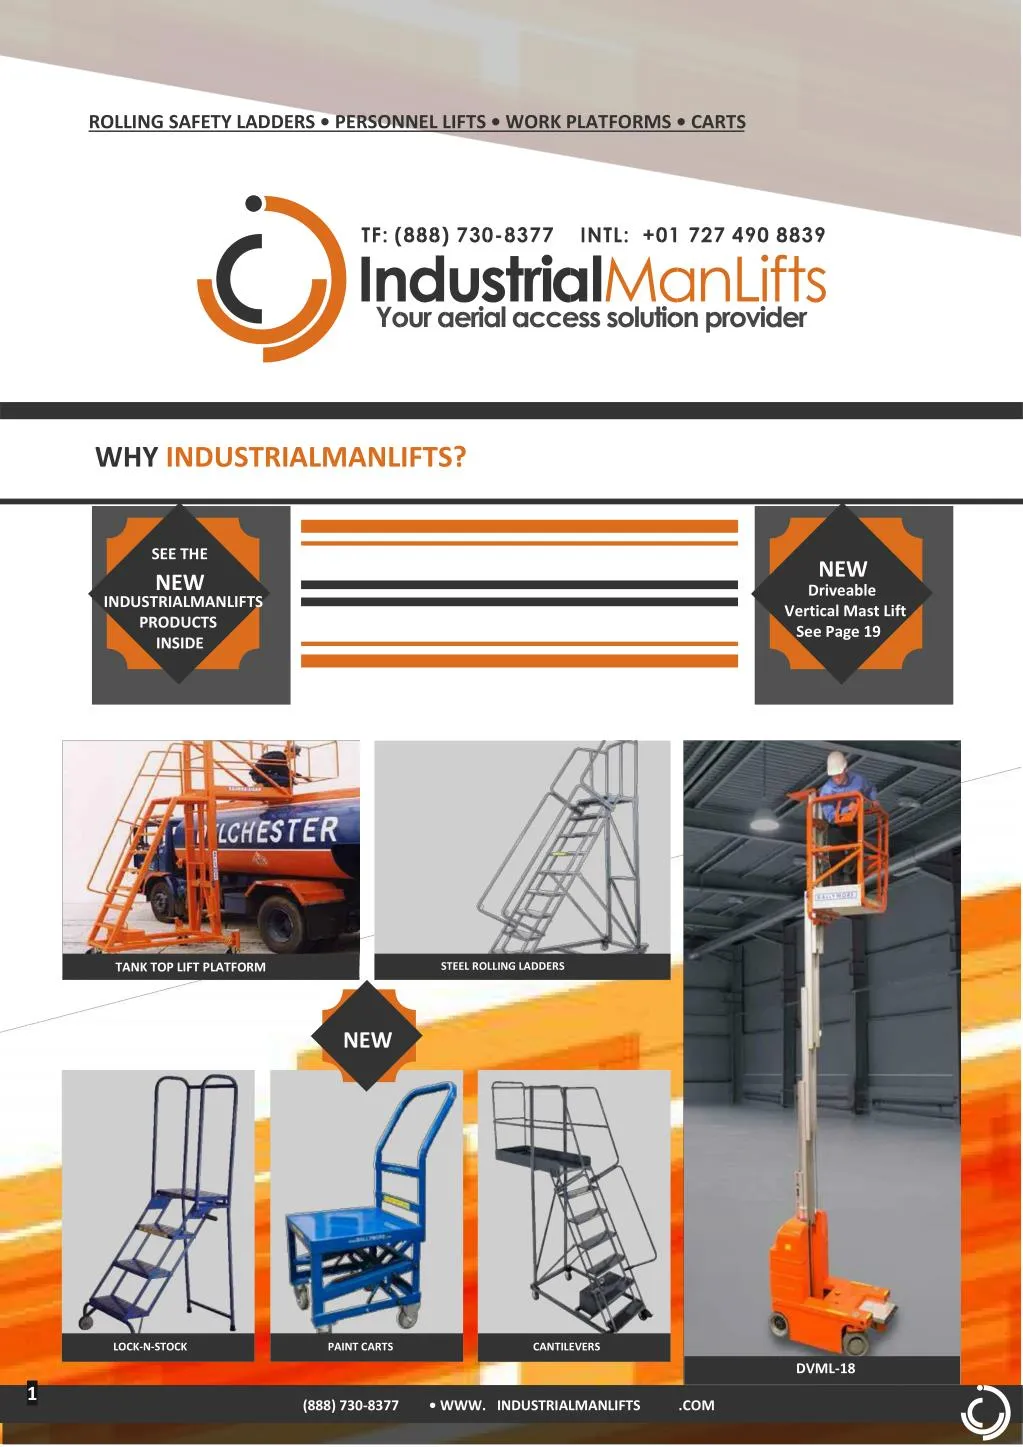 rolling safety ladders personnel lifts work